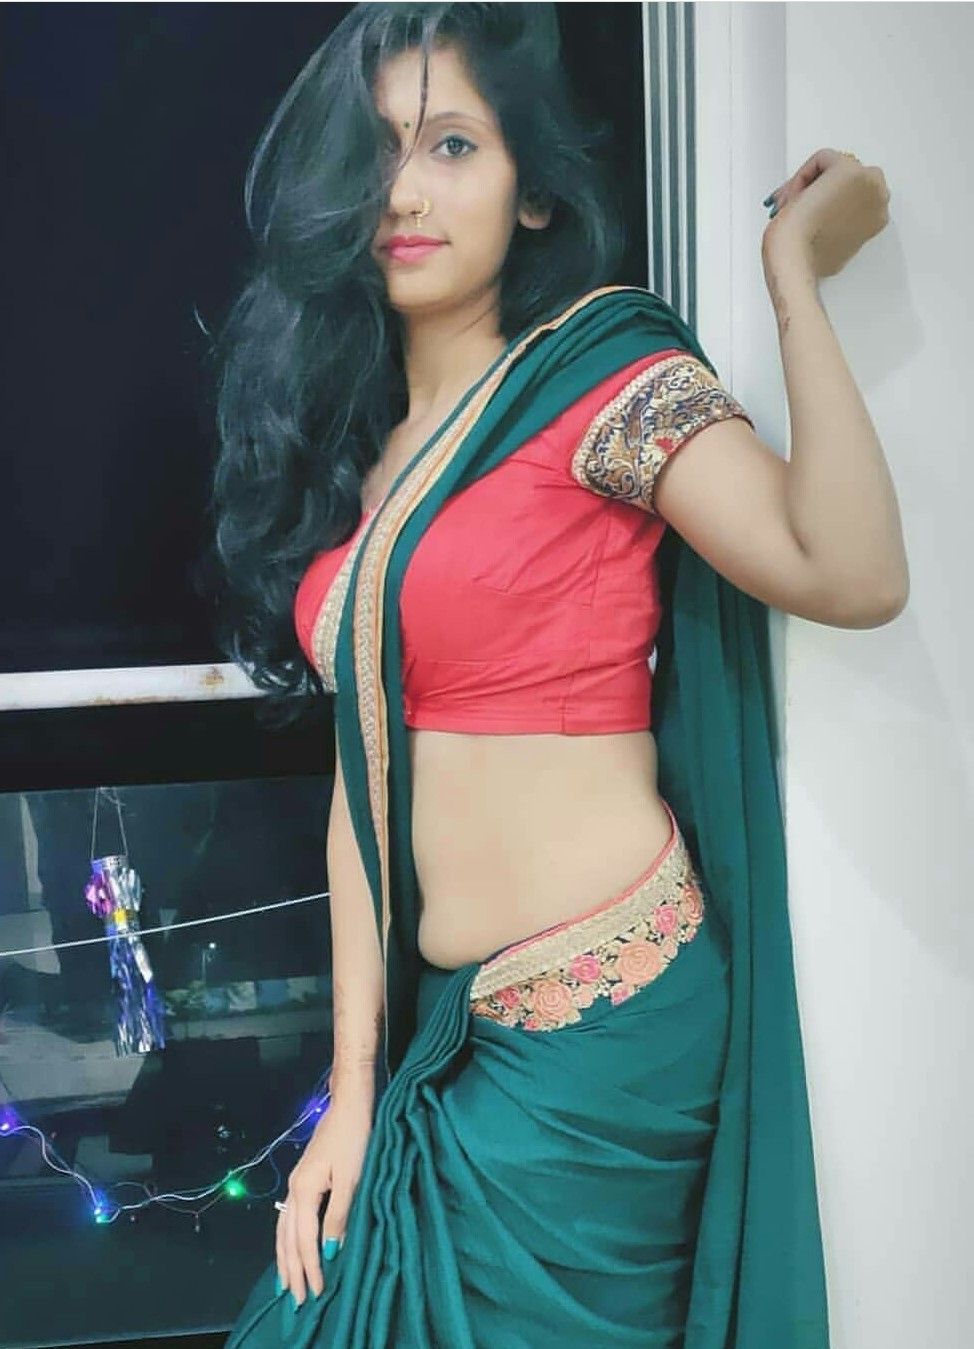  Pink Indian escorts provides Indian girls +91 7304365977